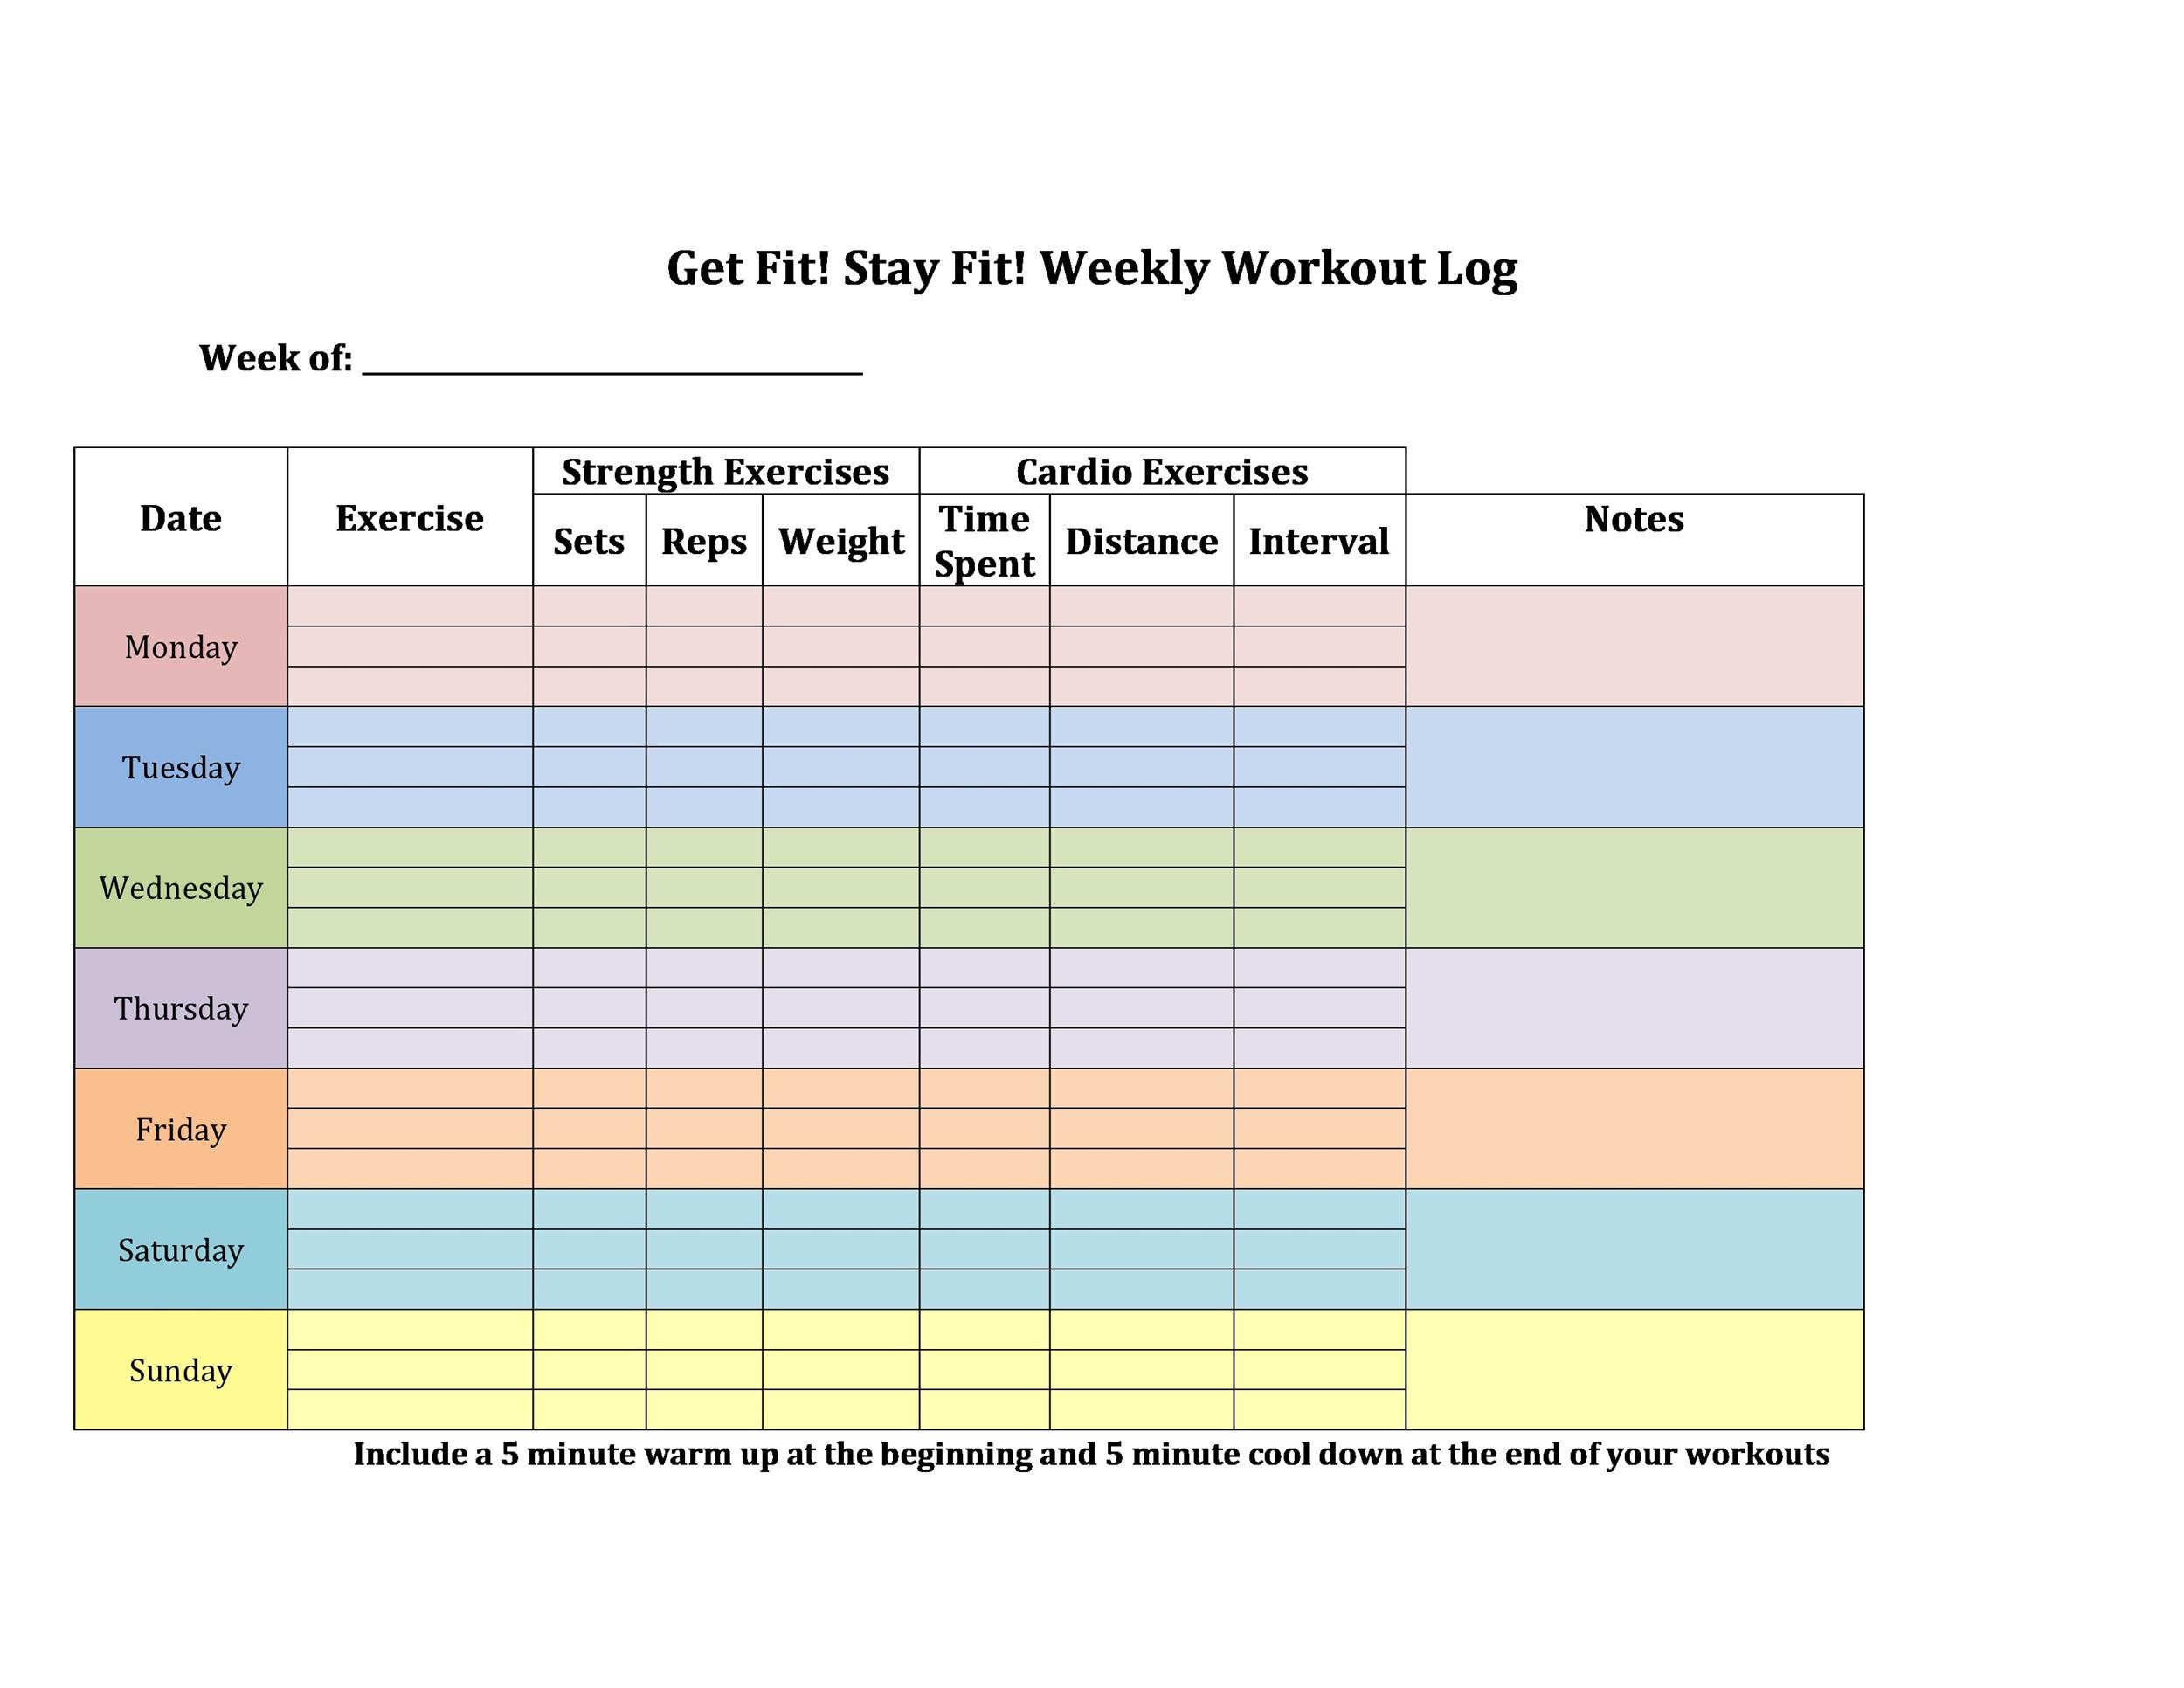 Printable Exercise Chart Template